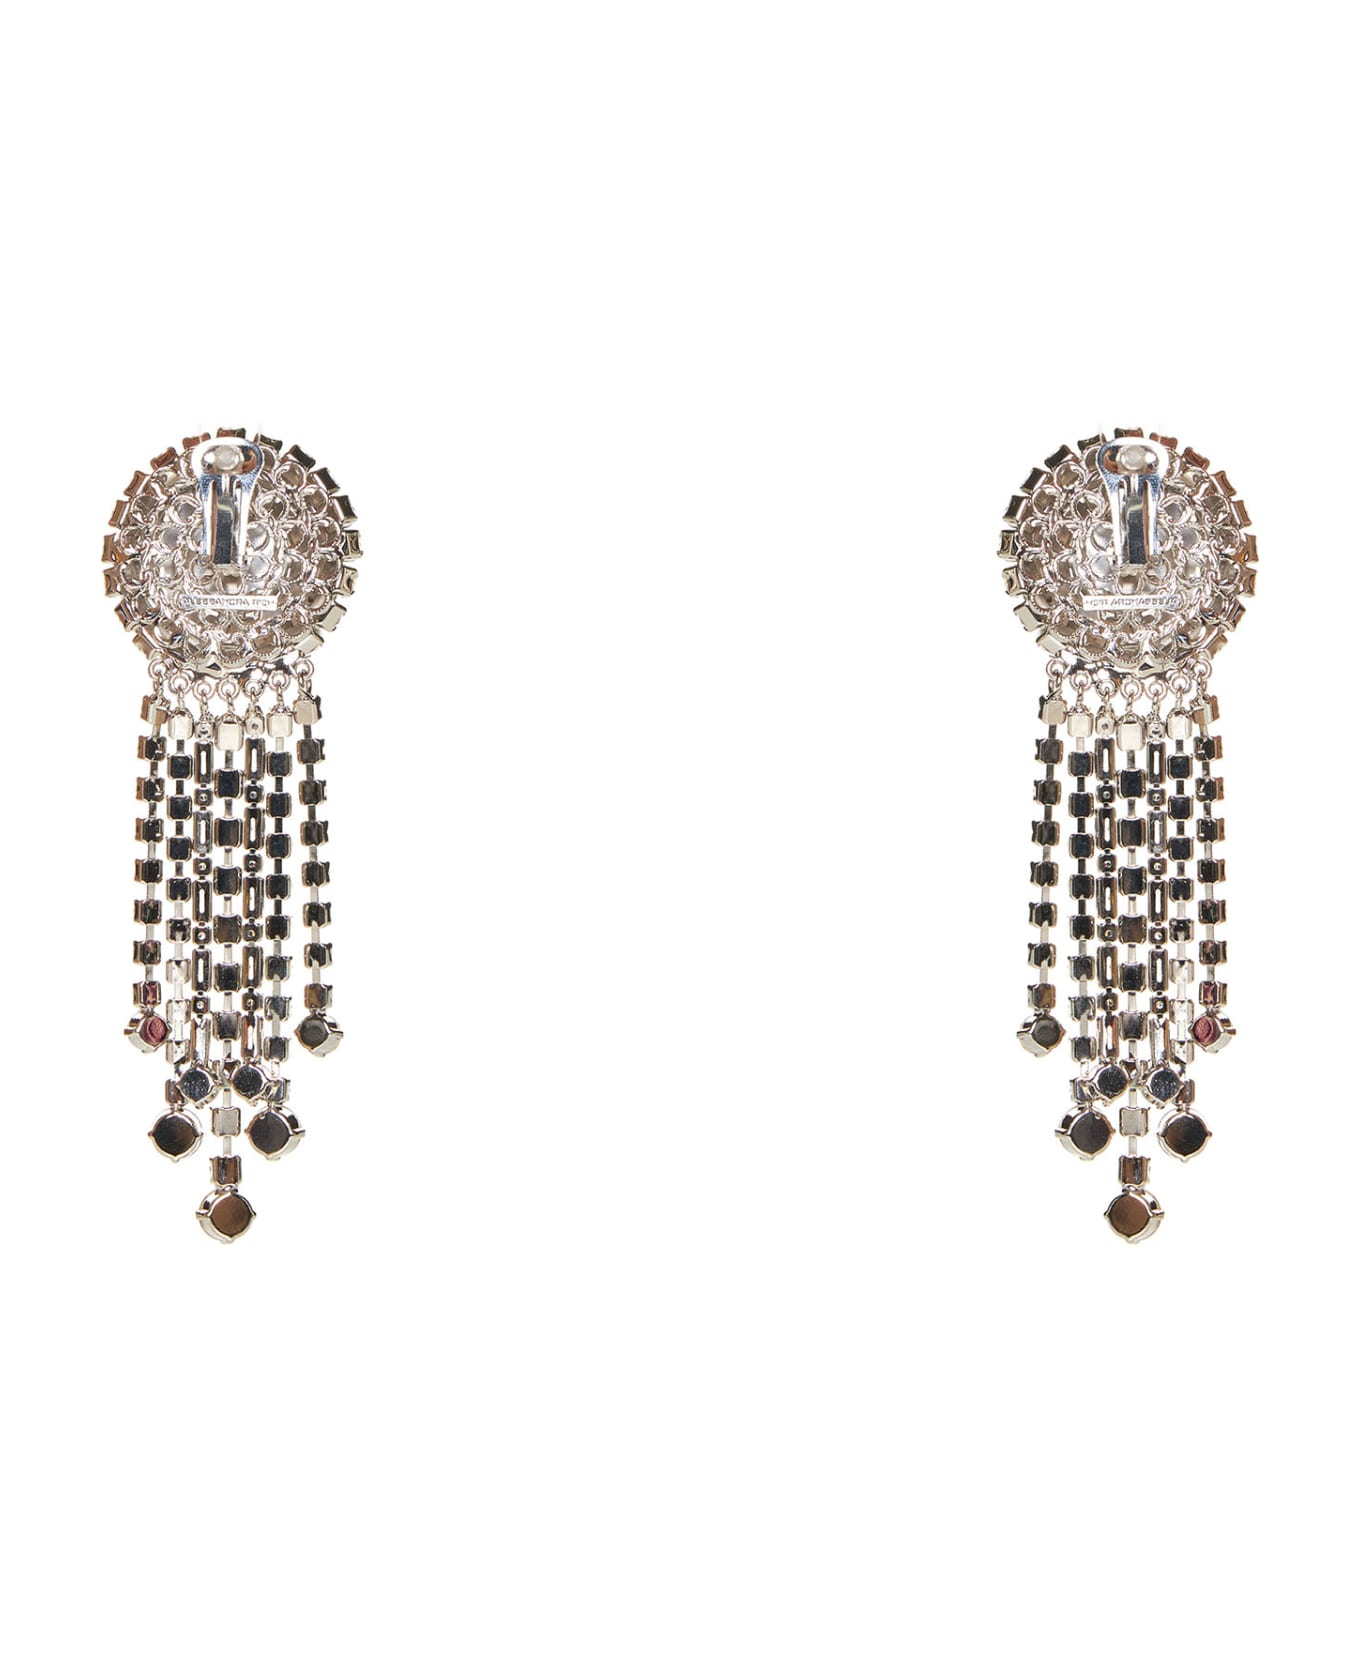 Alessandra Rich Earrings - Cry silver イヤリング